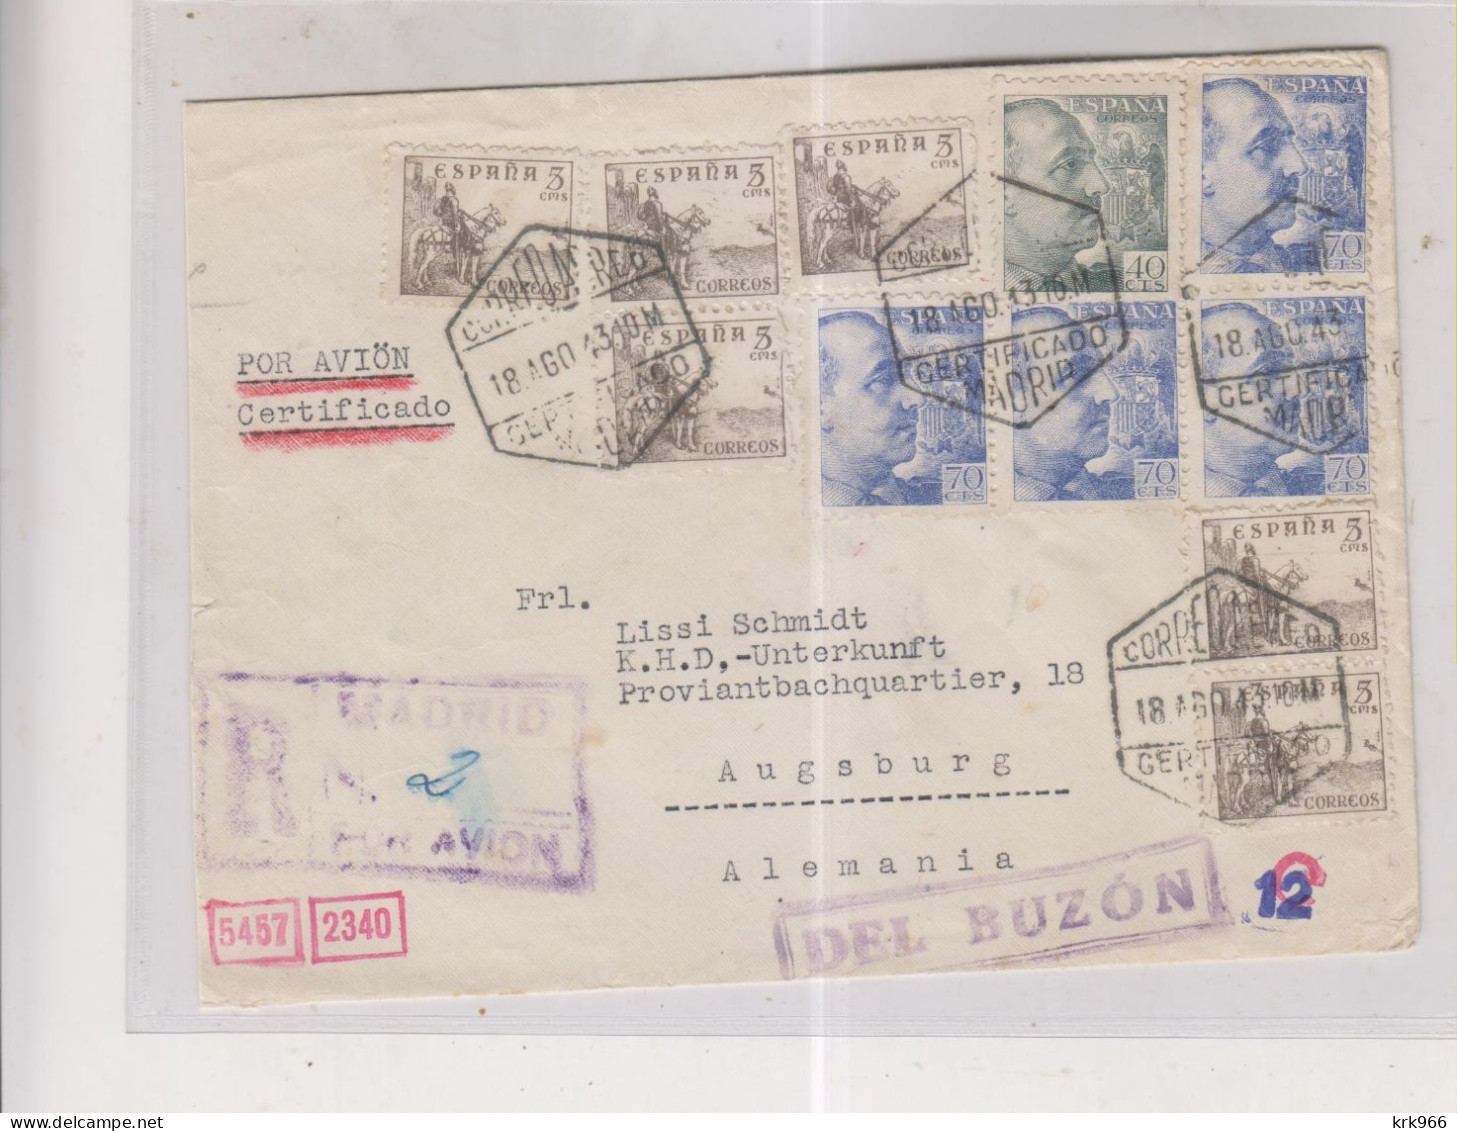 SPAIN MADRID 1943 Censored Registered Airmail Cover To Germany - Covers & Documents